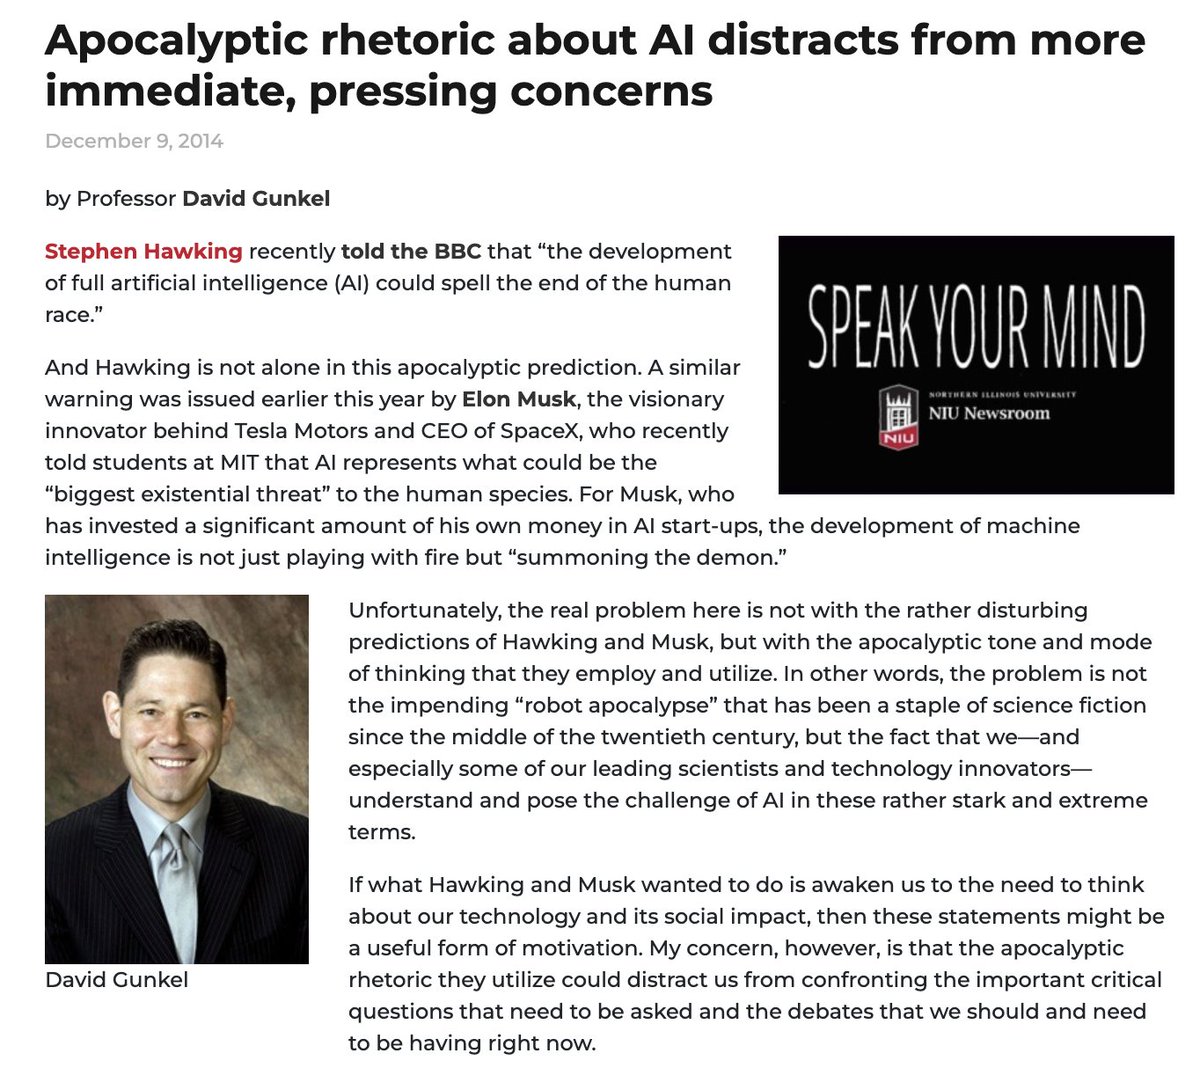 I was reminded today that some of us have been fighting the #AI hype-fight for over a decade. I'd like to say it's nice when the rest of the world catches up to your research, but part of me wants to say 'What took you so long?' newsroom.niu.edu/apocalyptic-rh…